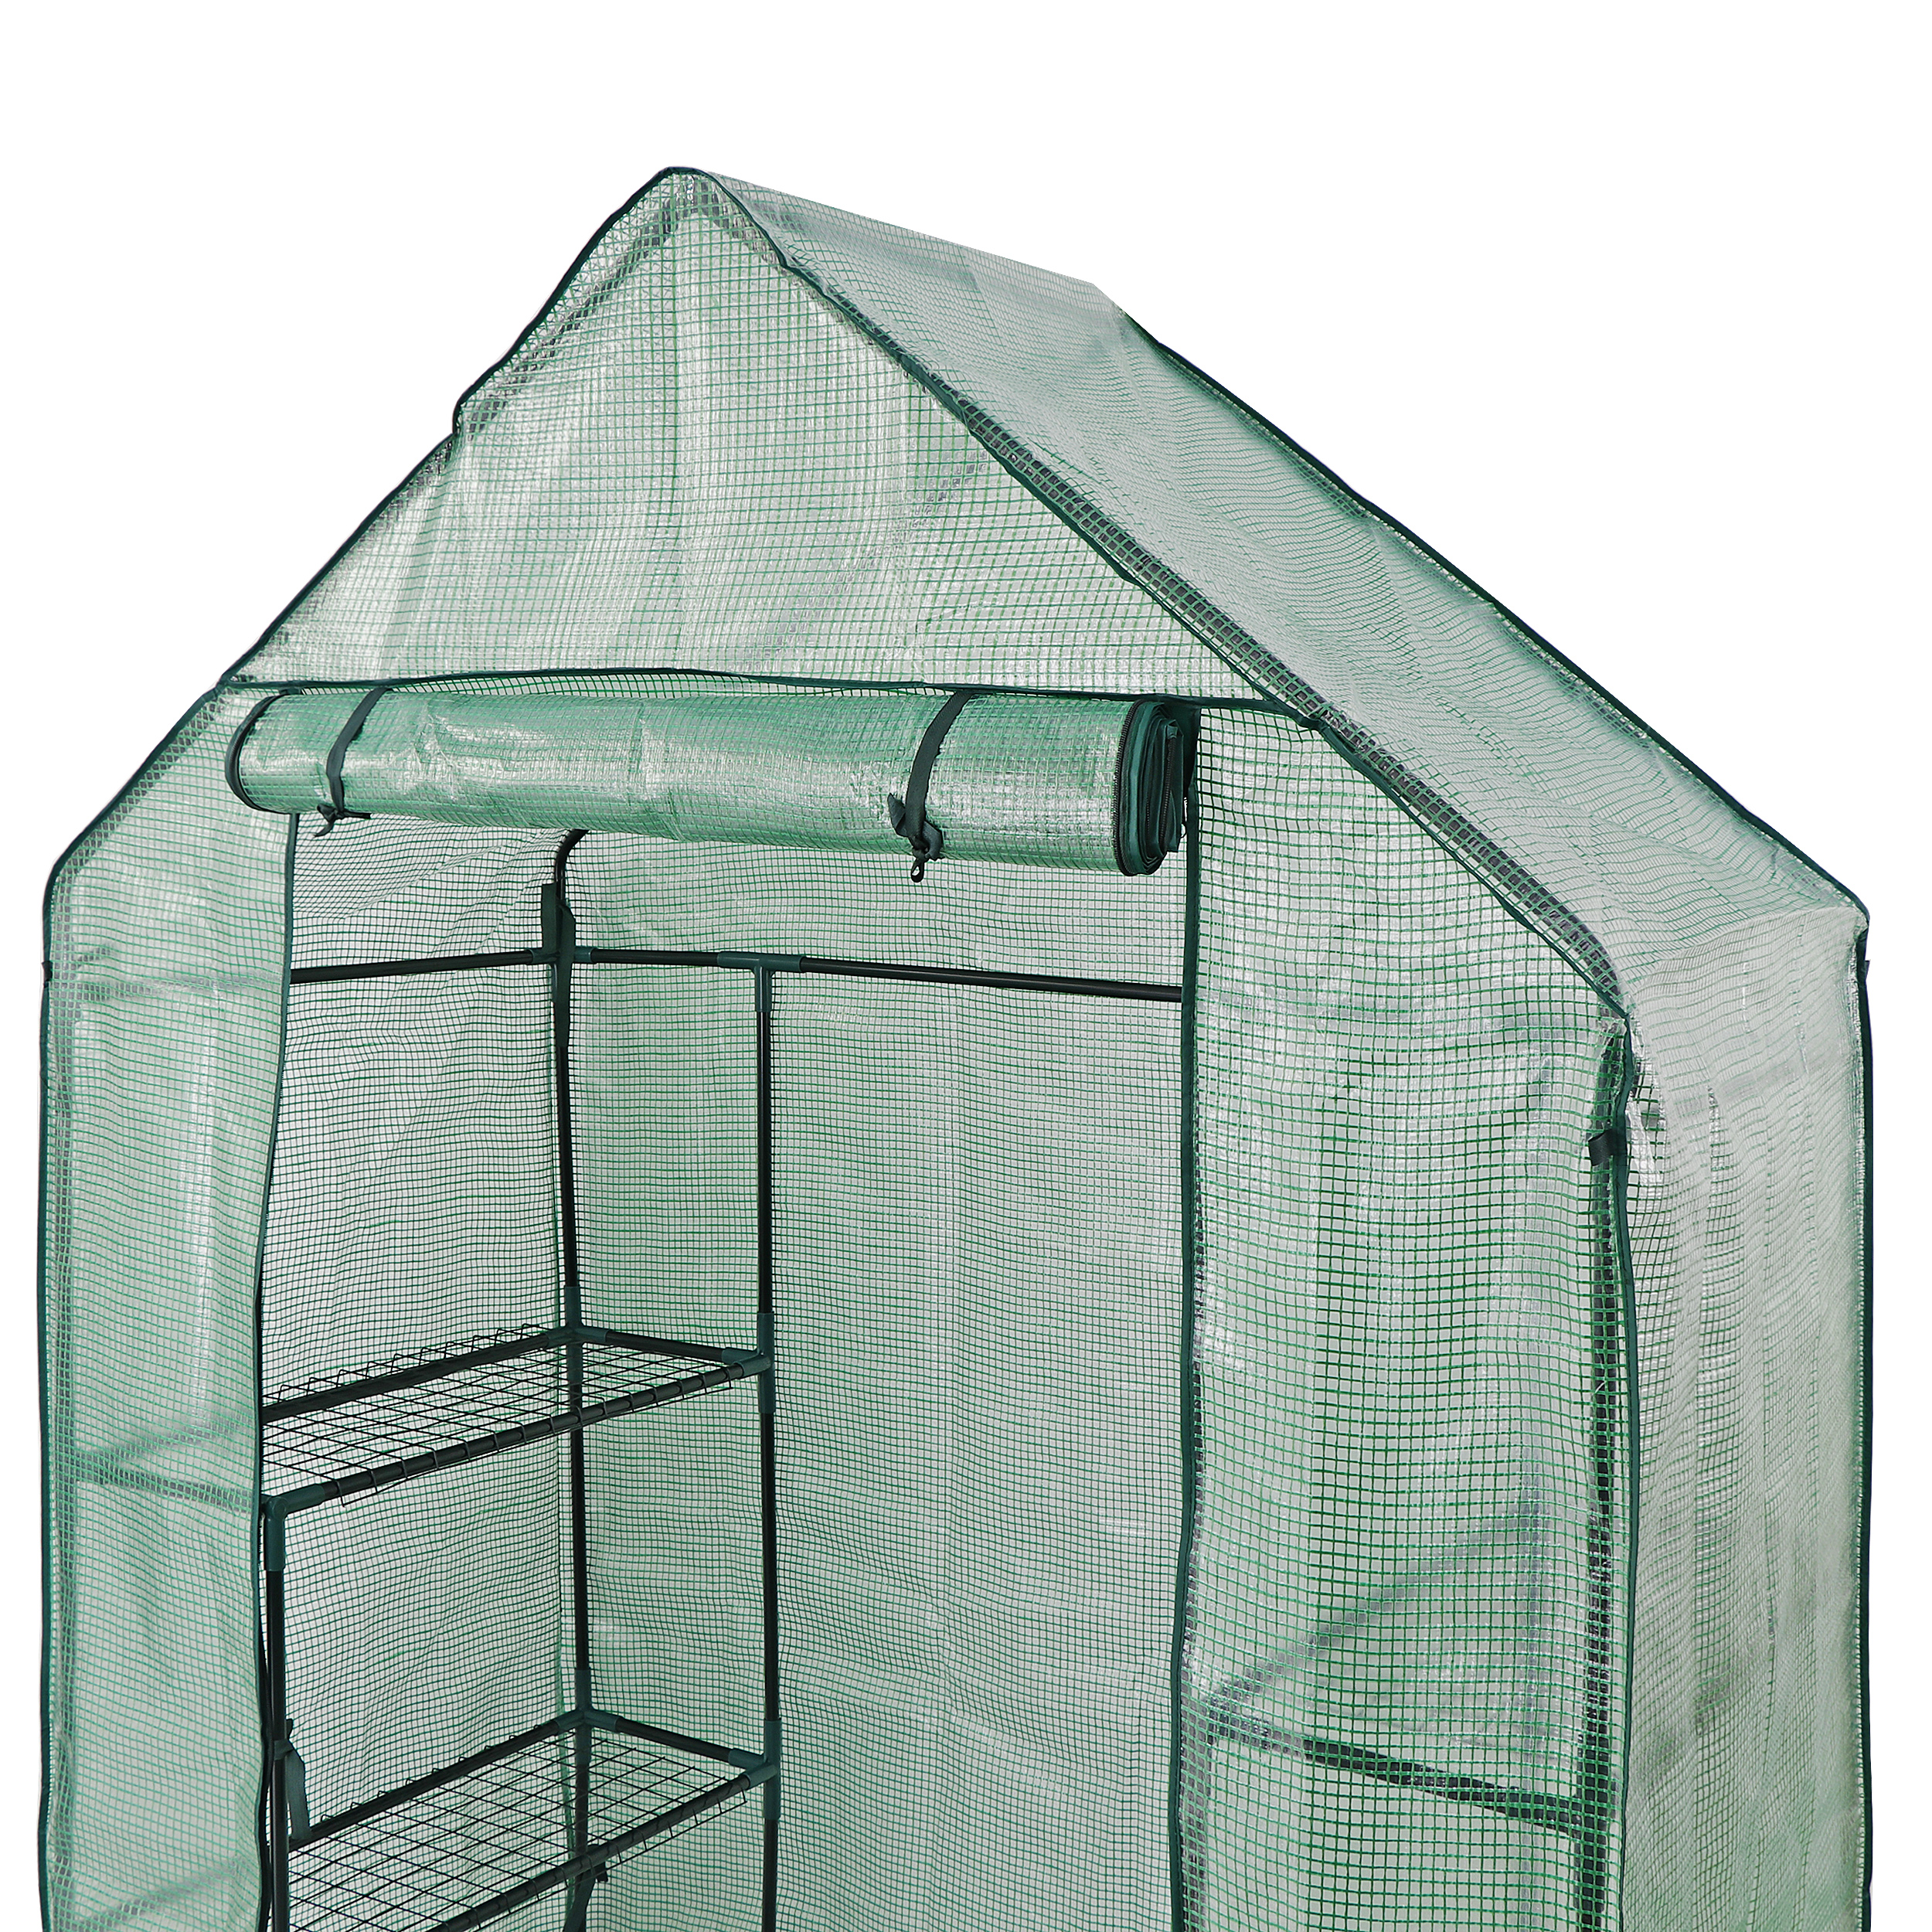 ZENY Mini Walk-in Green House Garden 3 Tier 6 Shelves Movable Plant Greenhouse 55.9 x 28.3 x 75.6" - image 2 of 7